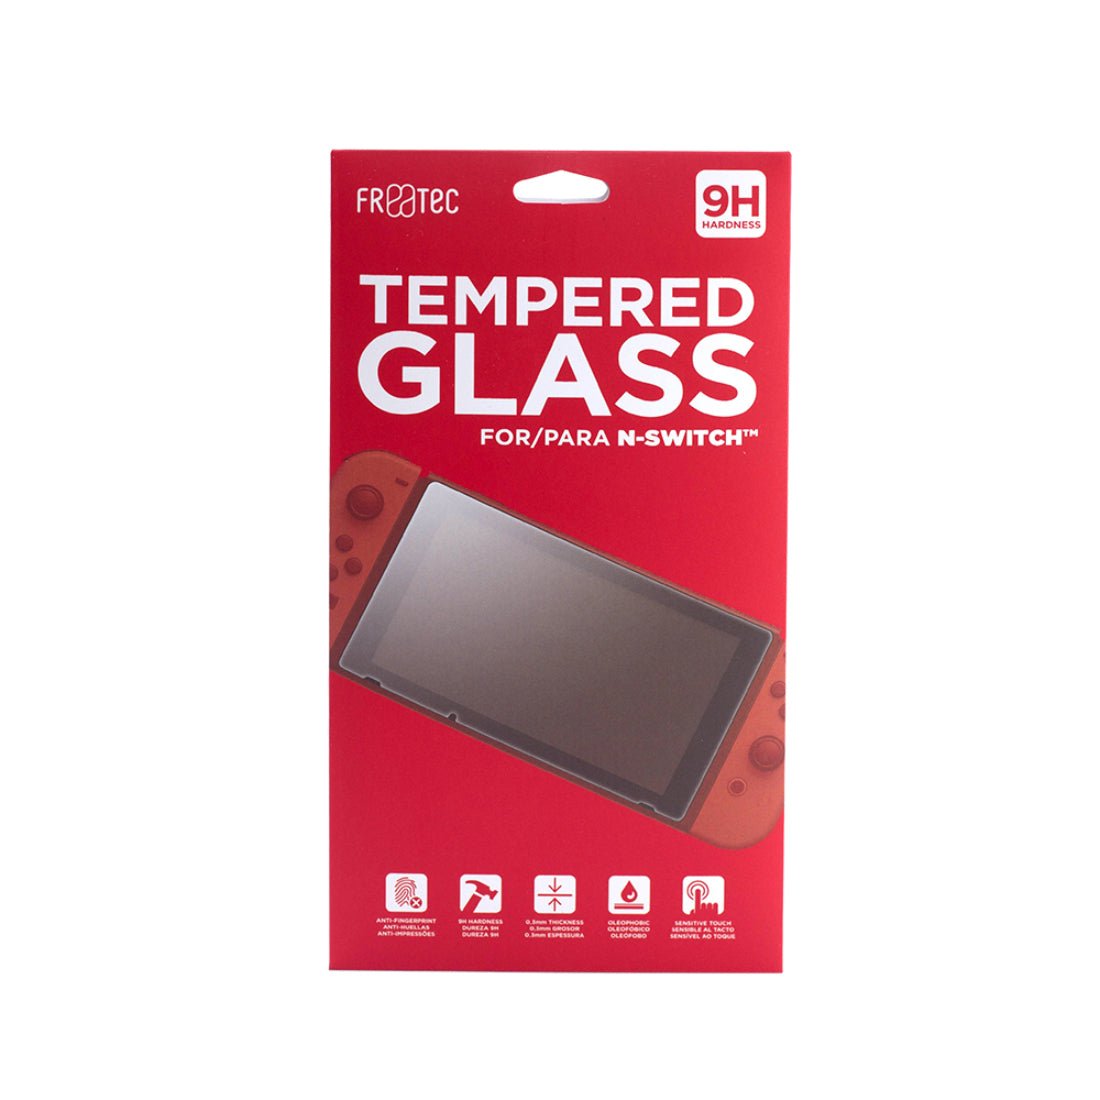 FR-TEC Tempered Glass Screen Protector For Nintendo Switch - أكسسوار - Store 974 | ستور ٩٧٤